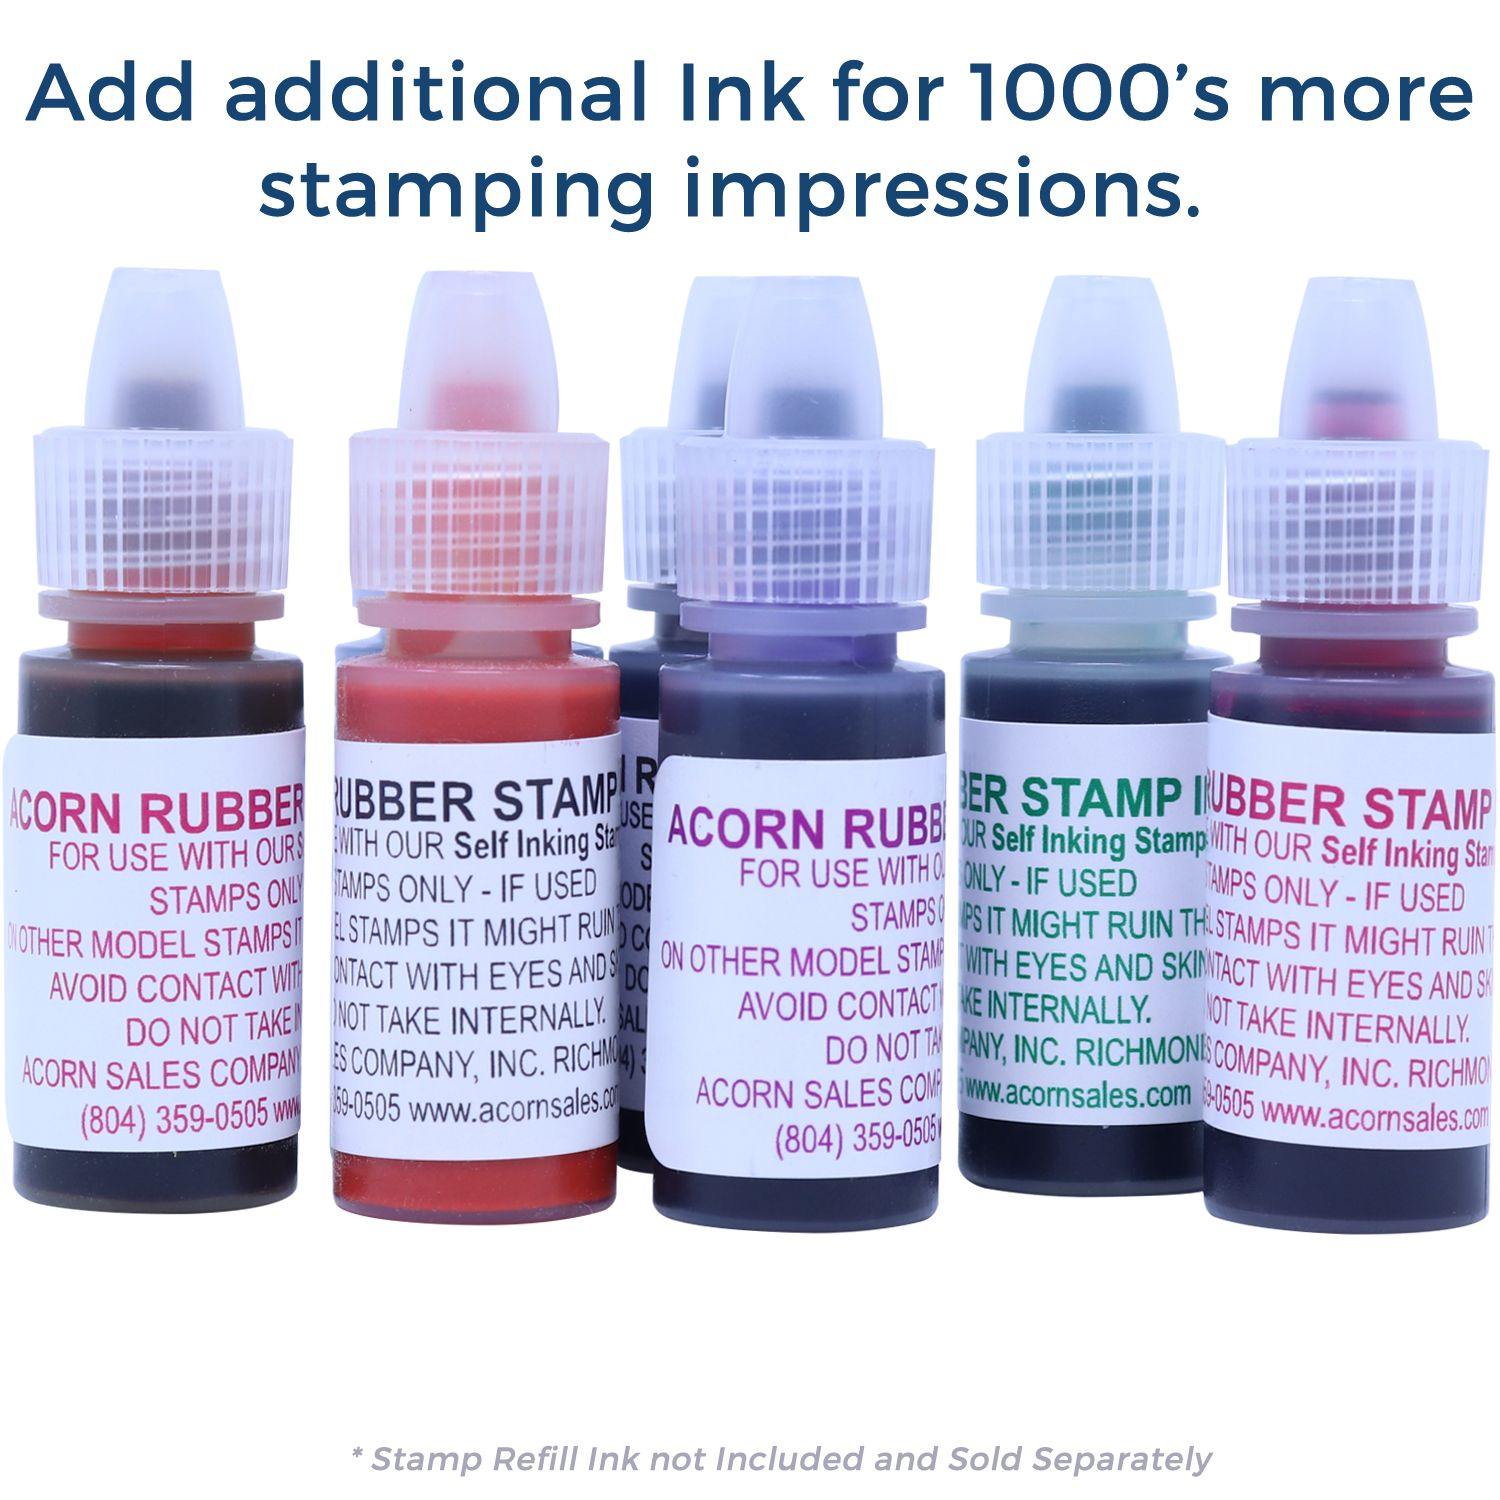 Refill Inks for Large Pre-Inked Client's Copy Stamp Available